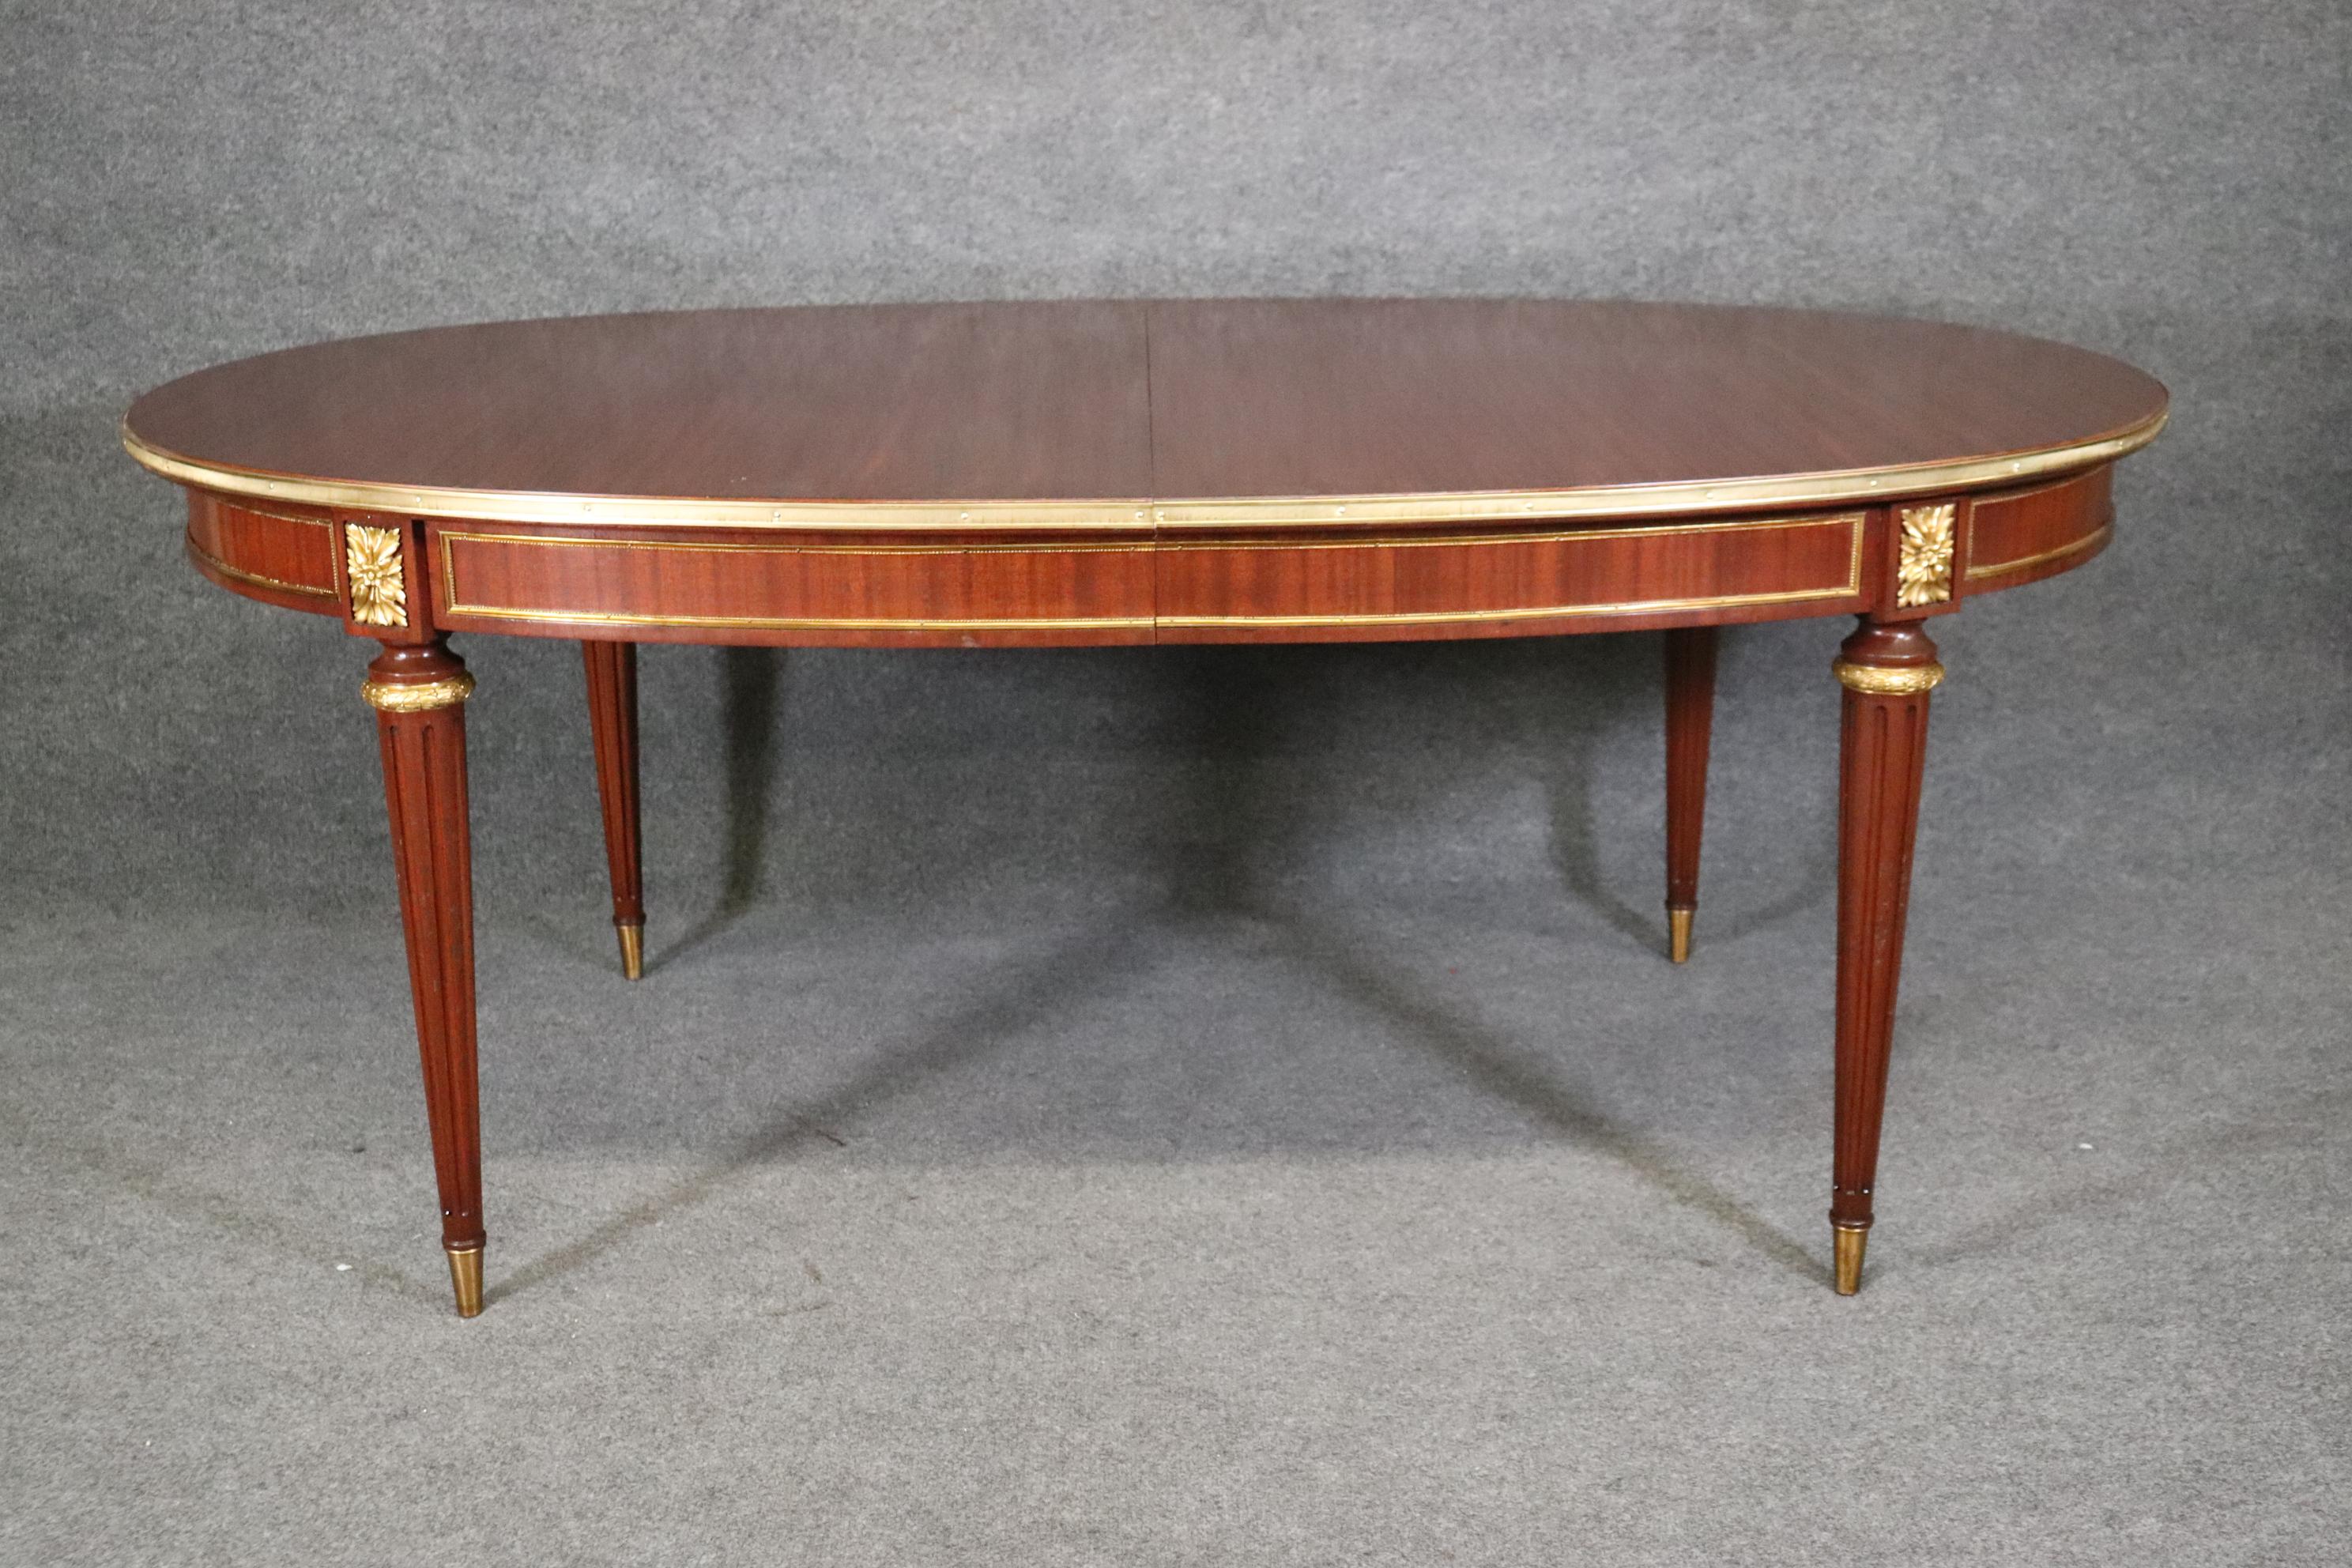 Dimensions - (Closed) H: 29 1/4in W: 72 3/4in D: 45in (Open) W: 108 1/2in

This Maison Jansen French Louis XVI Directoire style dining room table is truly a show stopper and gives off a sophisticated and minimalistic luxury vibe wherever it's